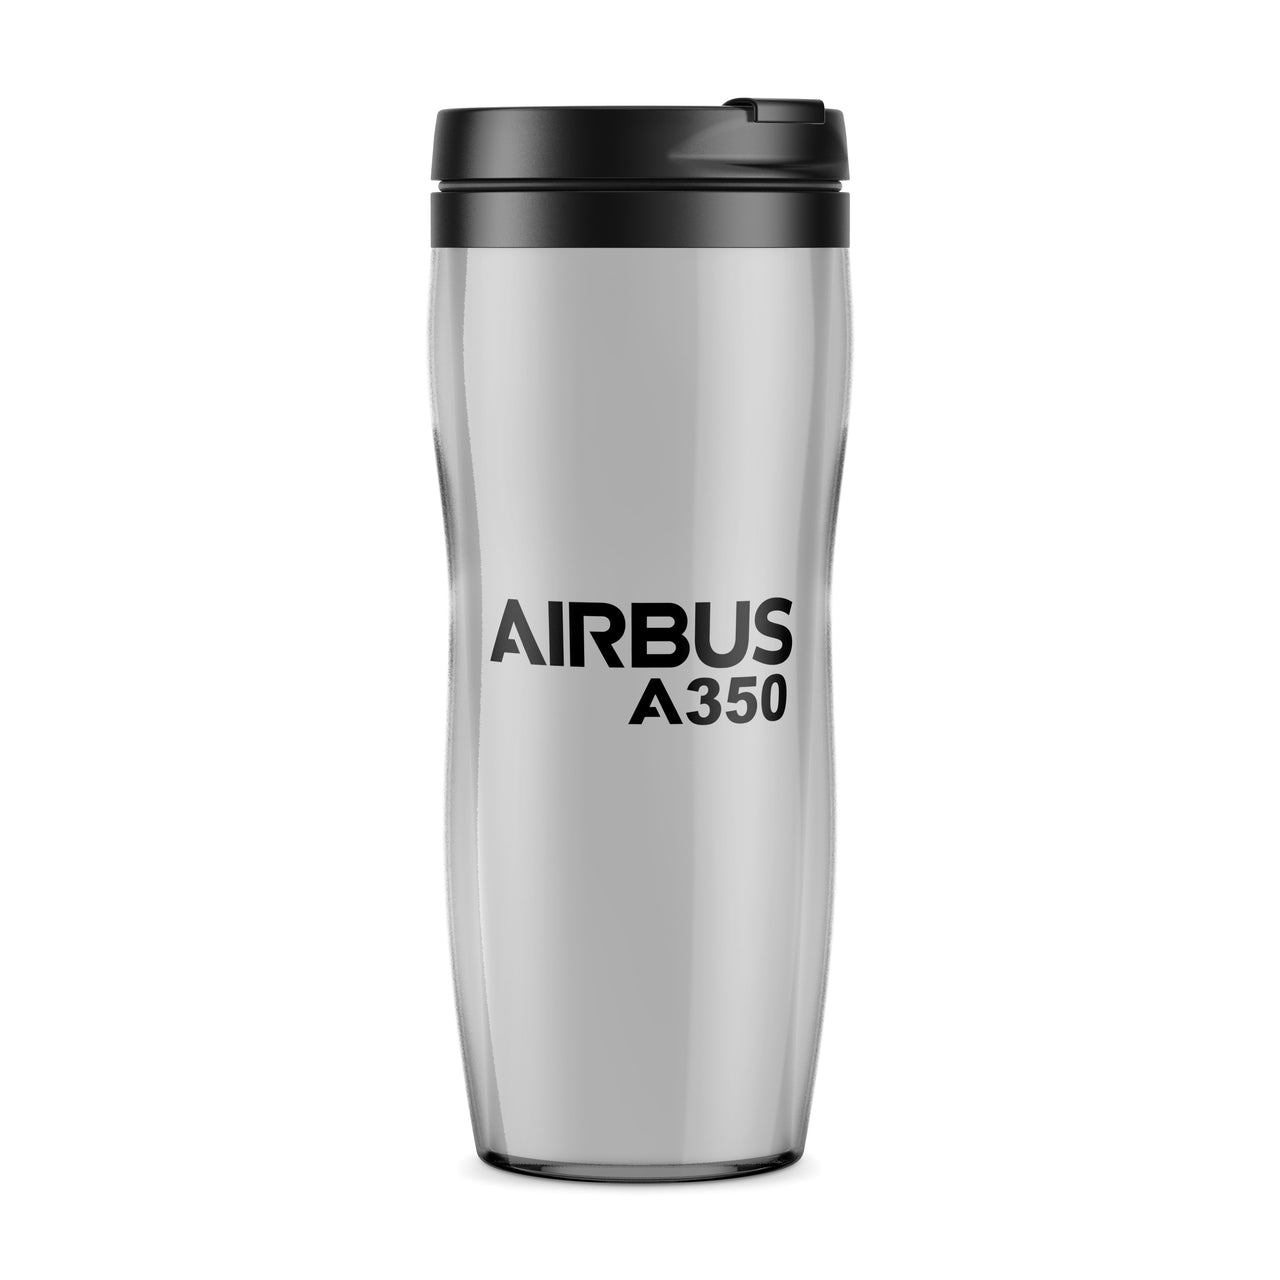 Airbus A350 & Text Designed Travel Mugs